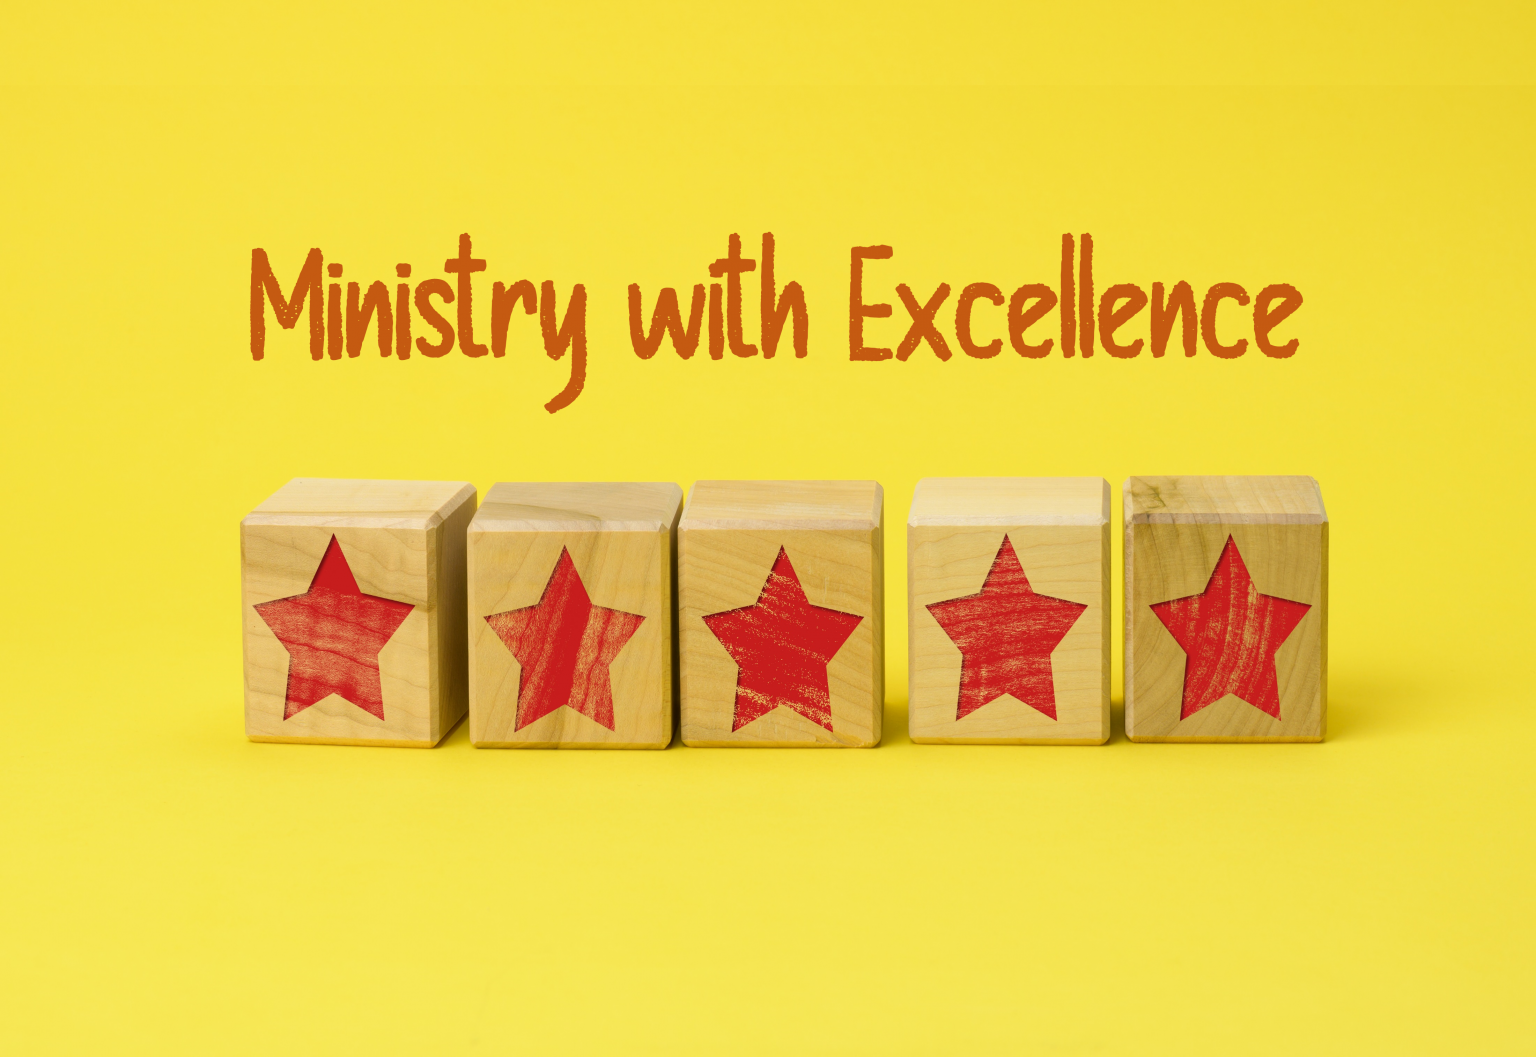 Ministry with Excellence